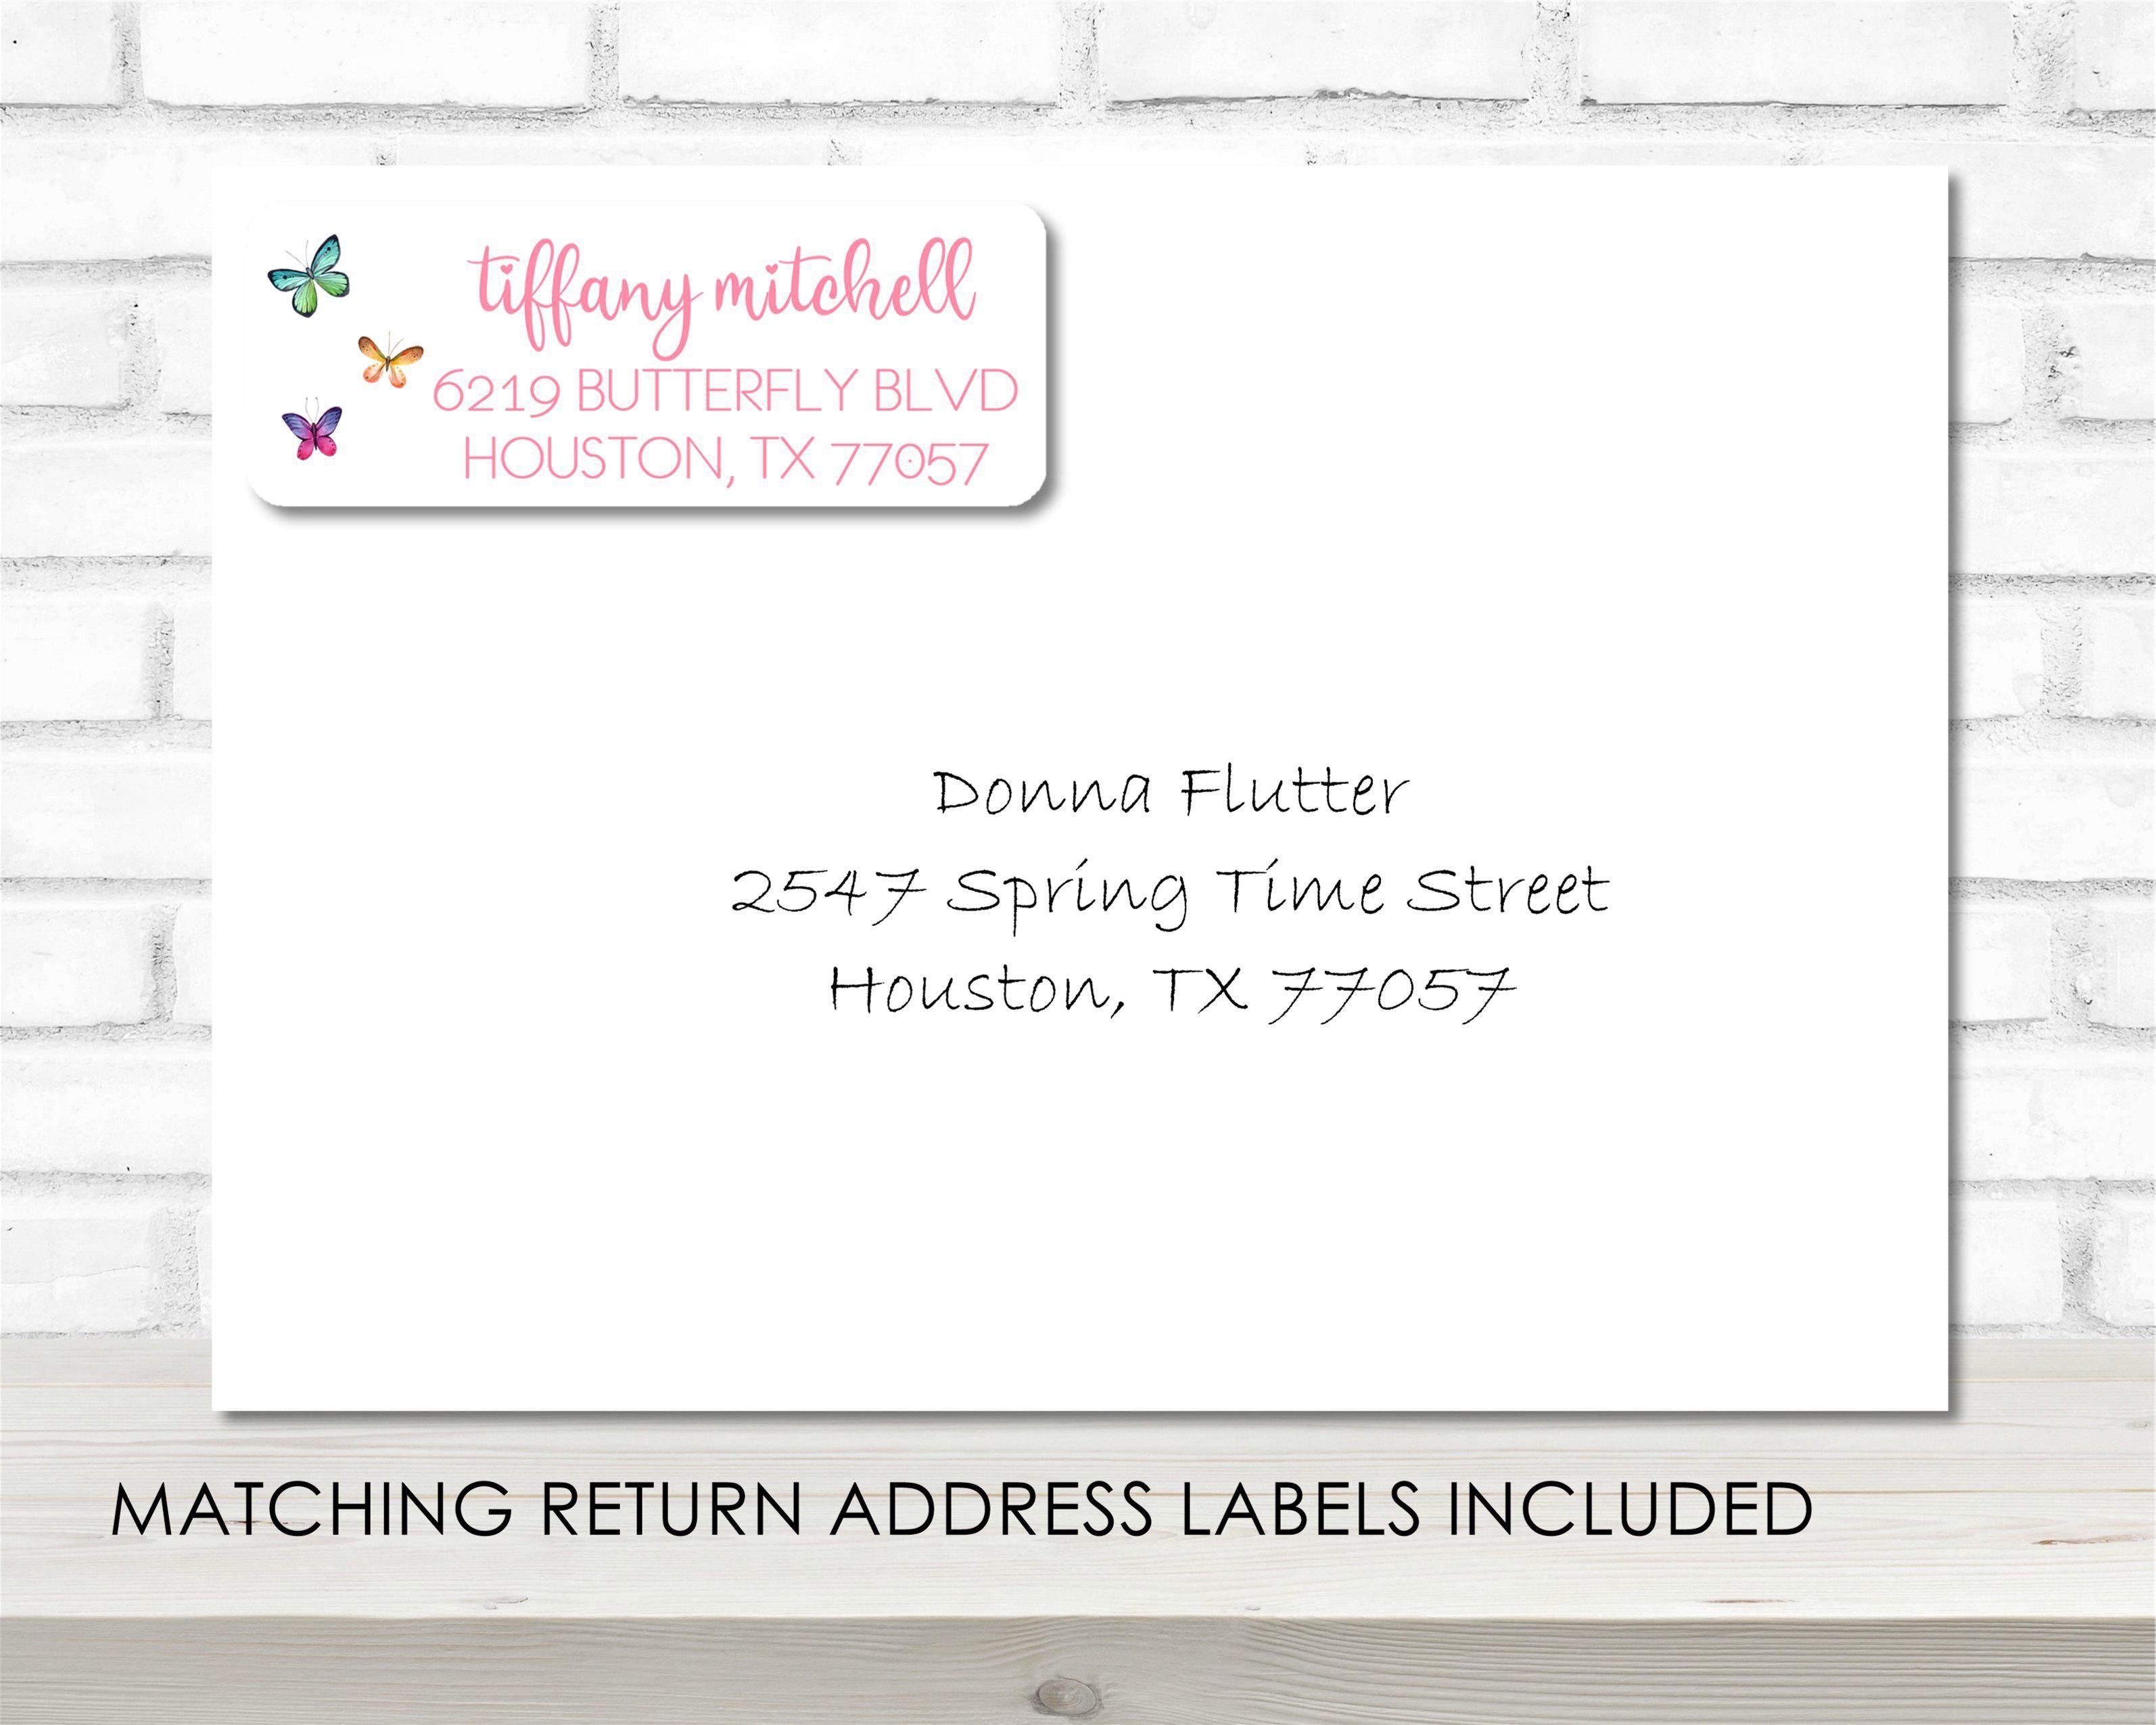 Girls Butterfly Baby Shower By Mail Invitations